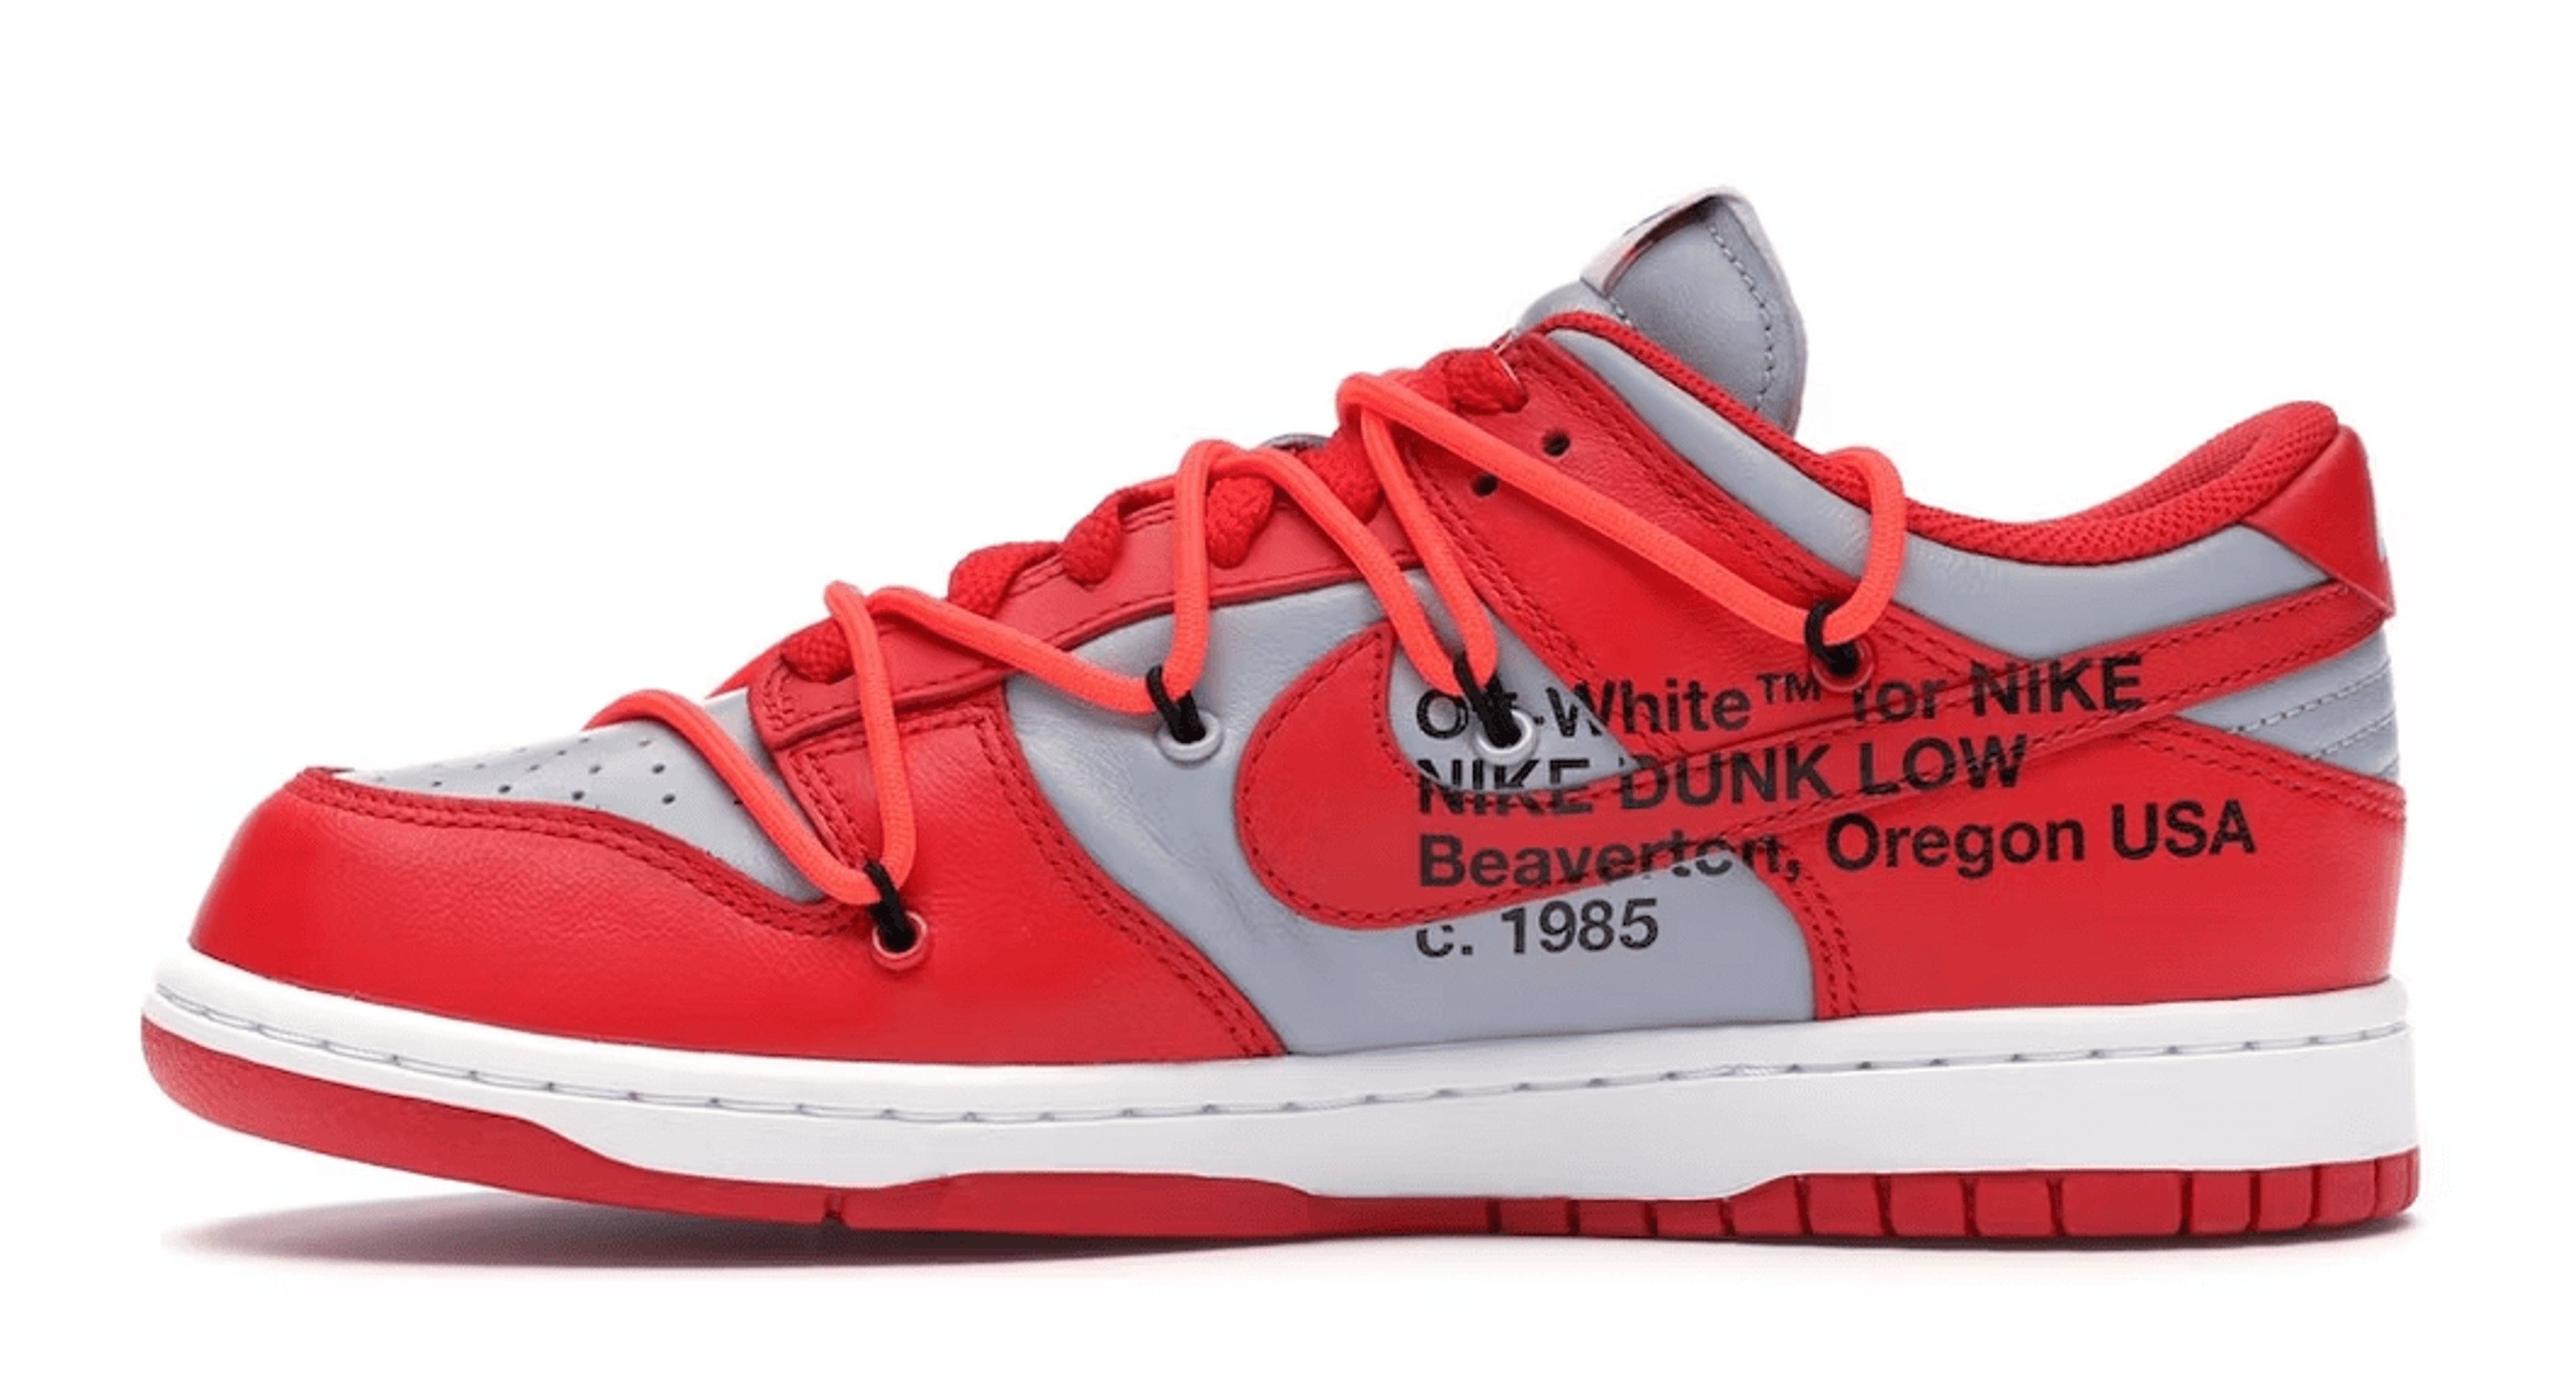 Instrument Mail Pilfer NTWRK - Nike Dunk Low Off-White University Red